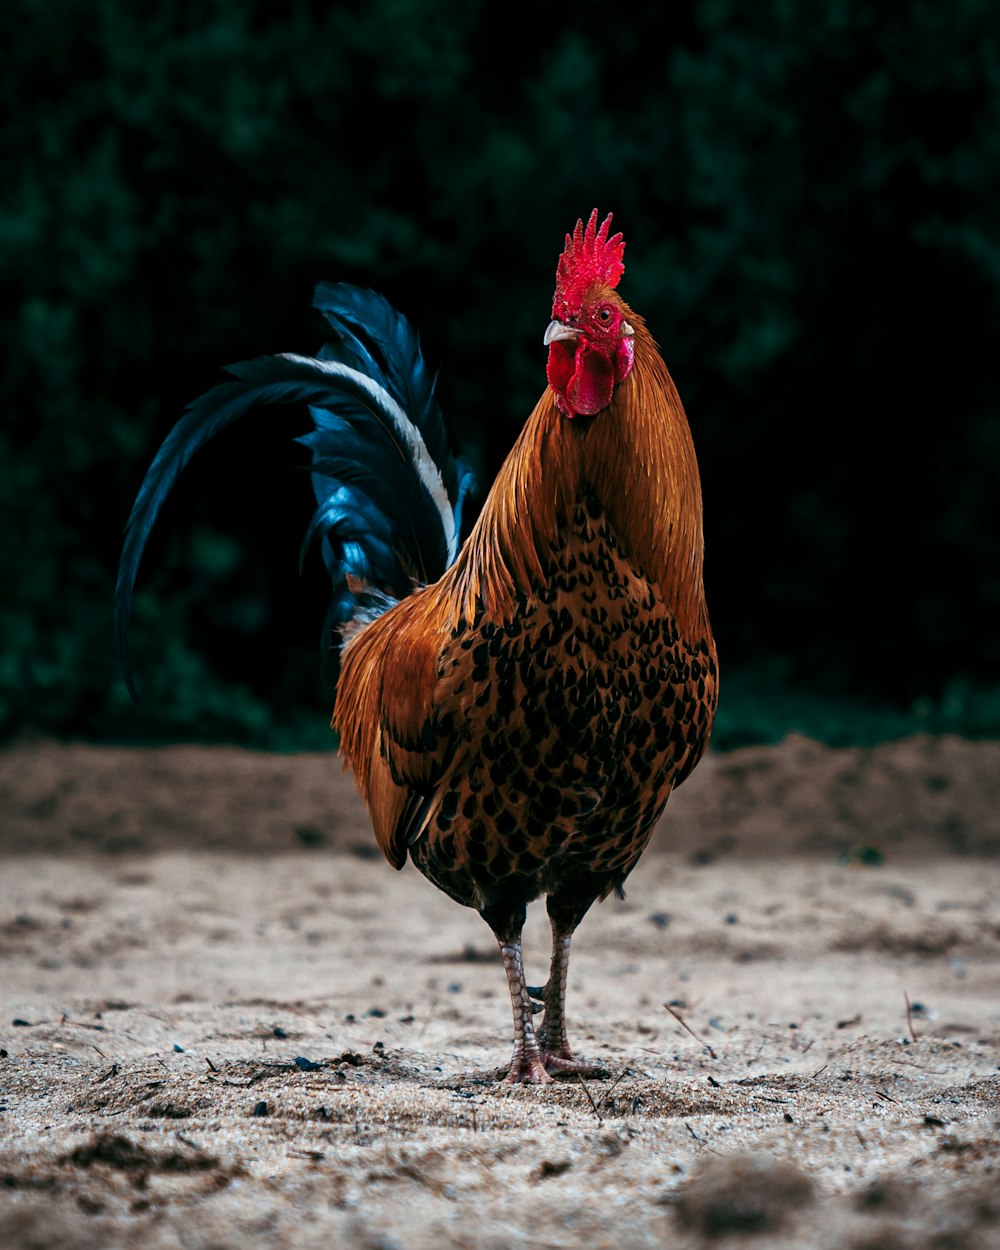 a rooster with a red head and blue tail